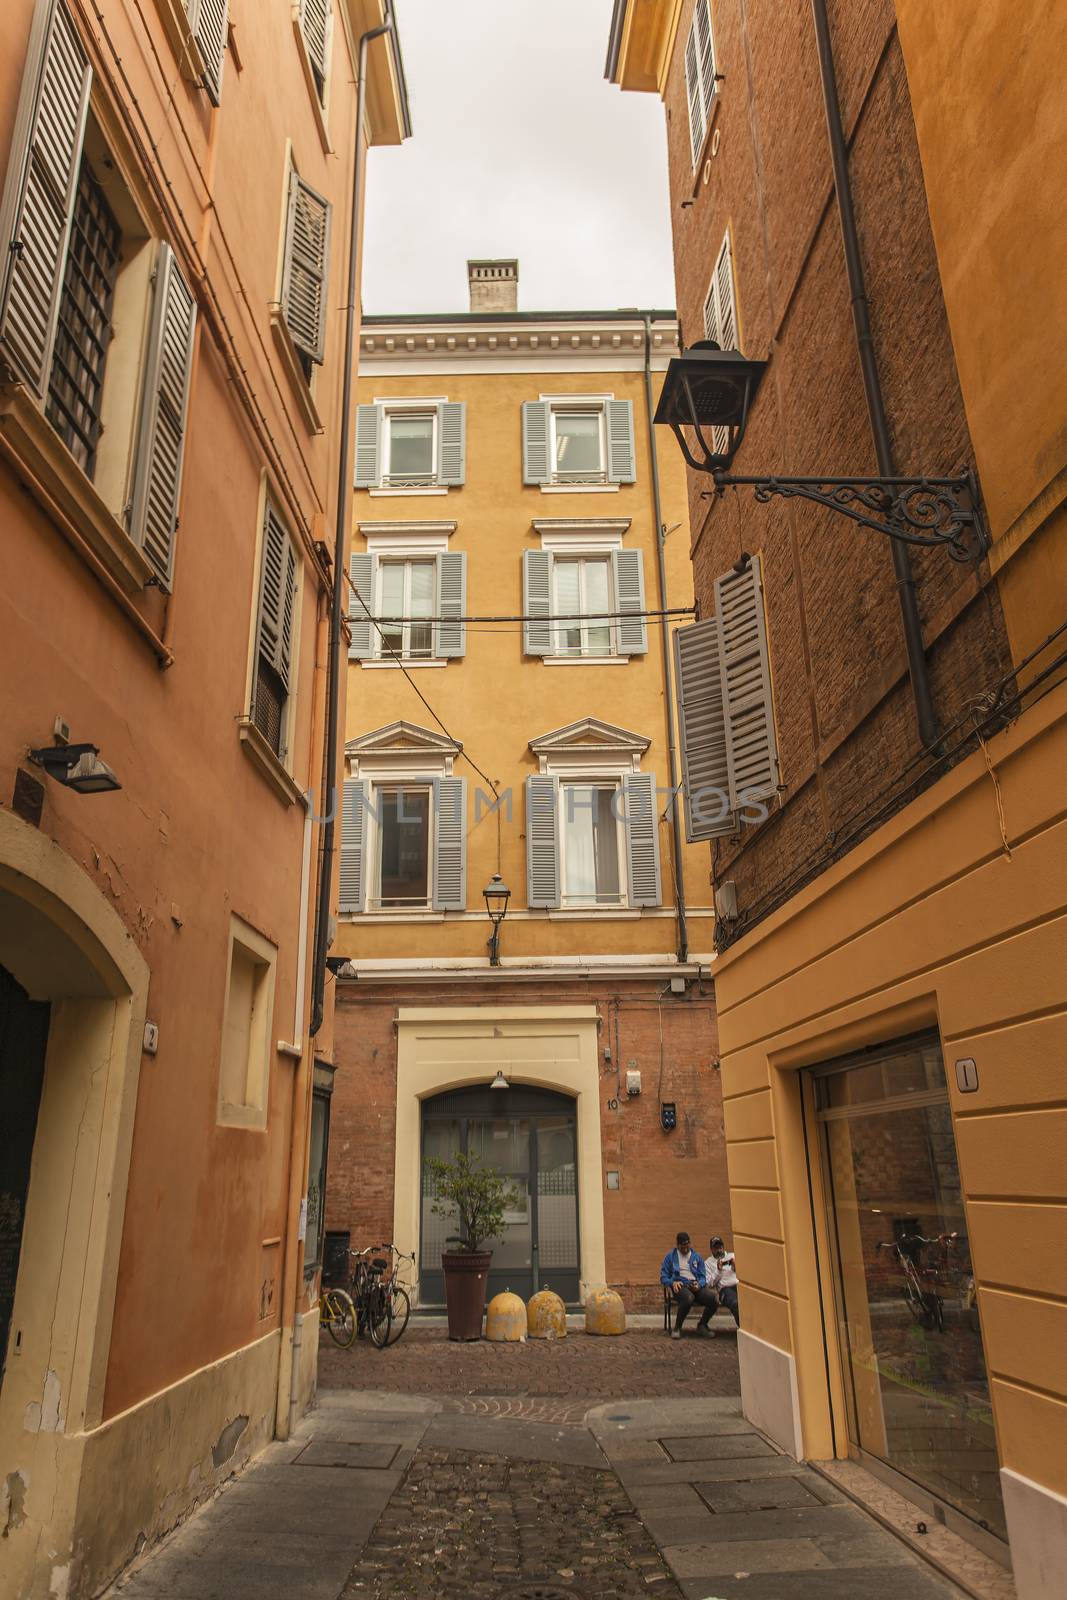 MODENA, ITALY 1 OCTOBER 2020: Modena's alley with historic buildings